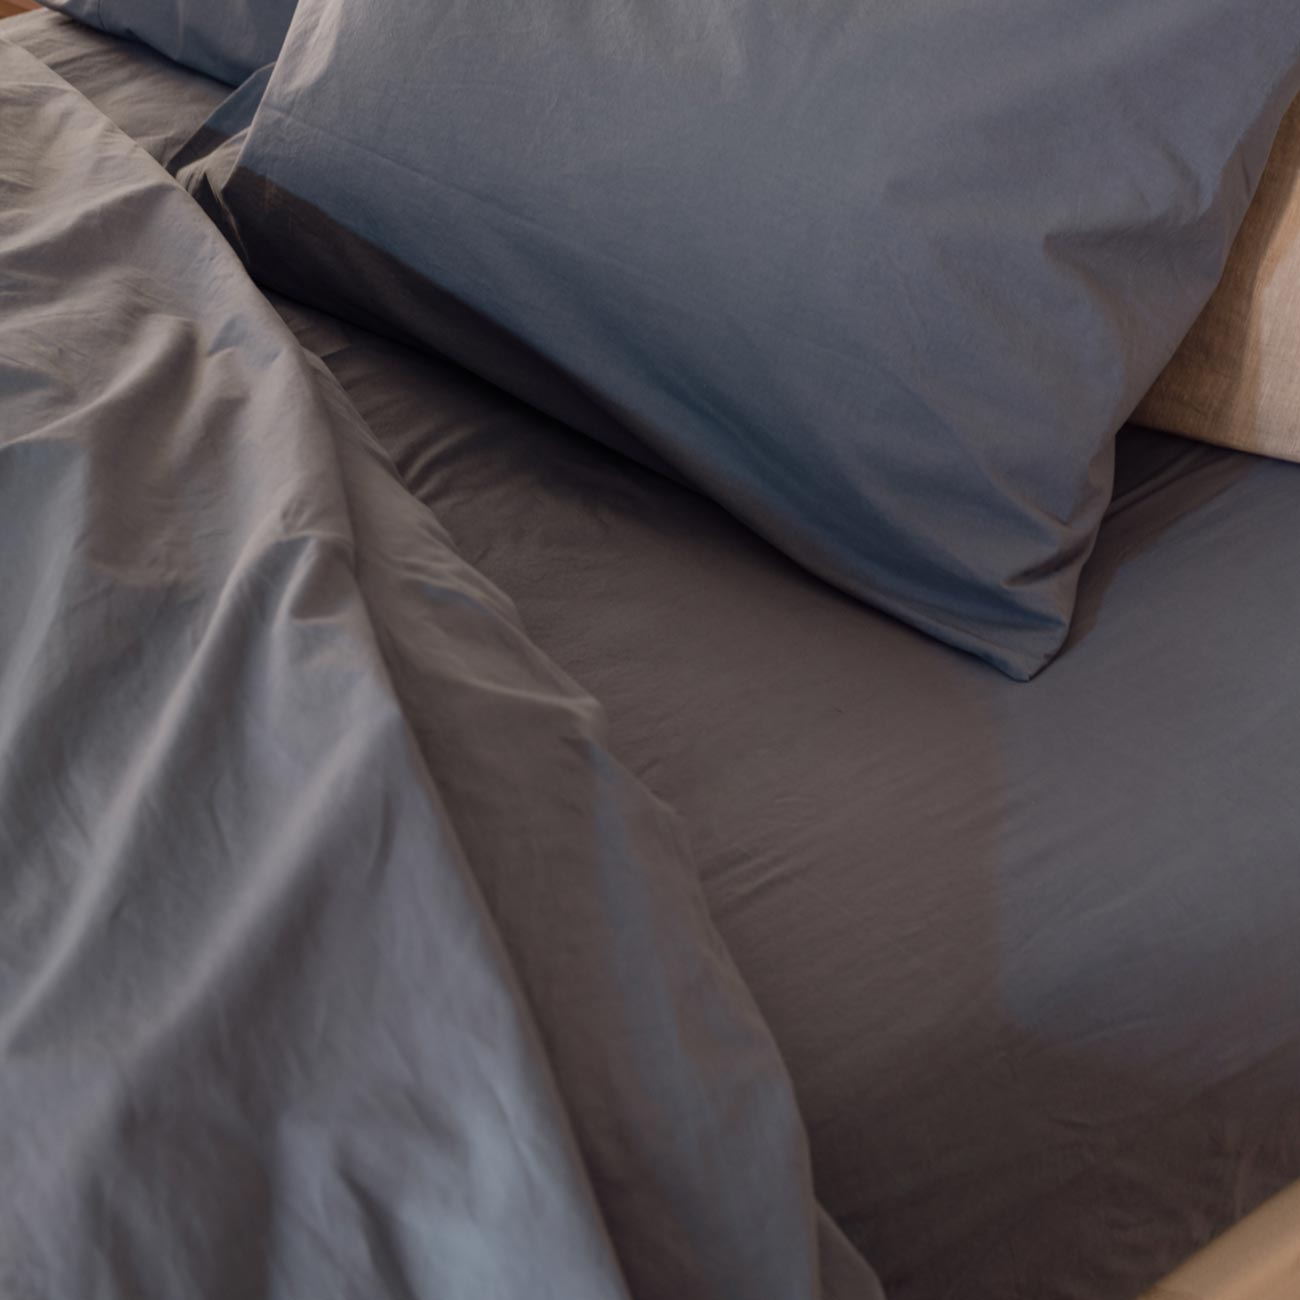 Cove Blue Washed Percale Cotton Bedding